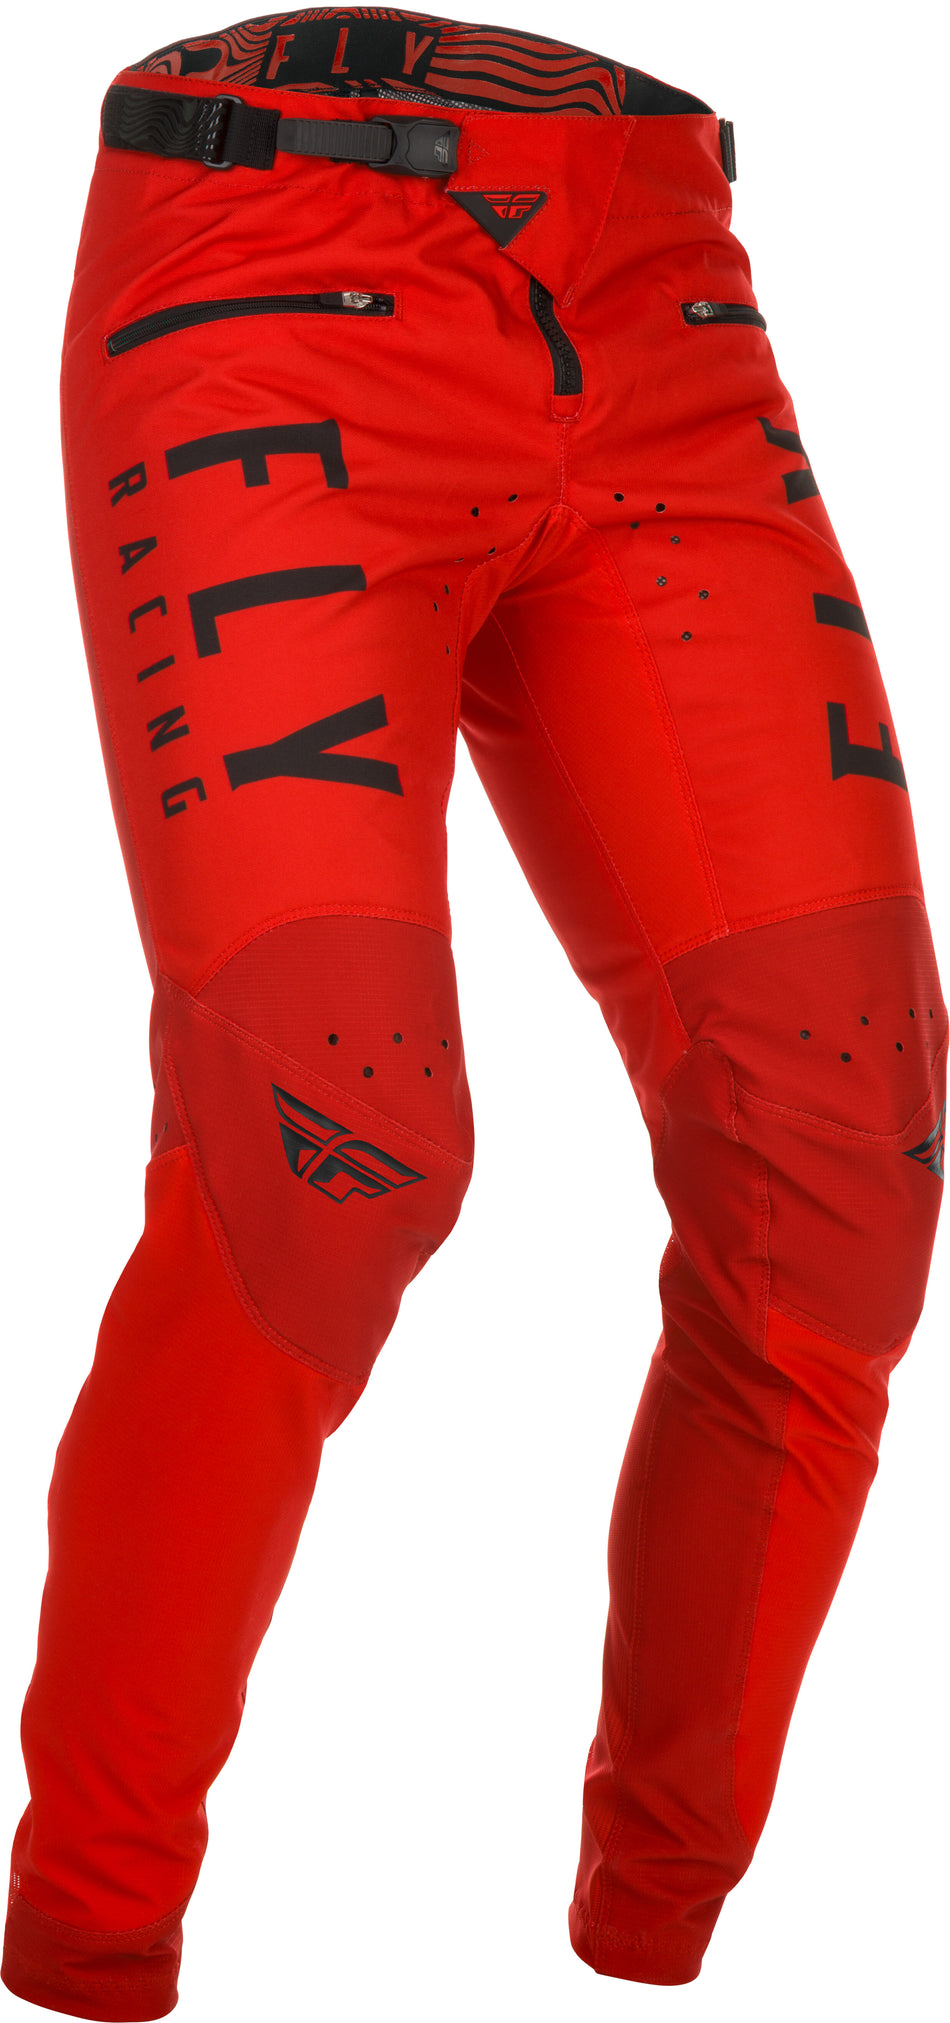 FLY RACING Youth Kinetic Bicycle Pants Red Sz 26 374-04326